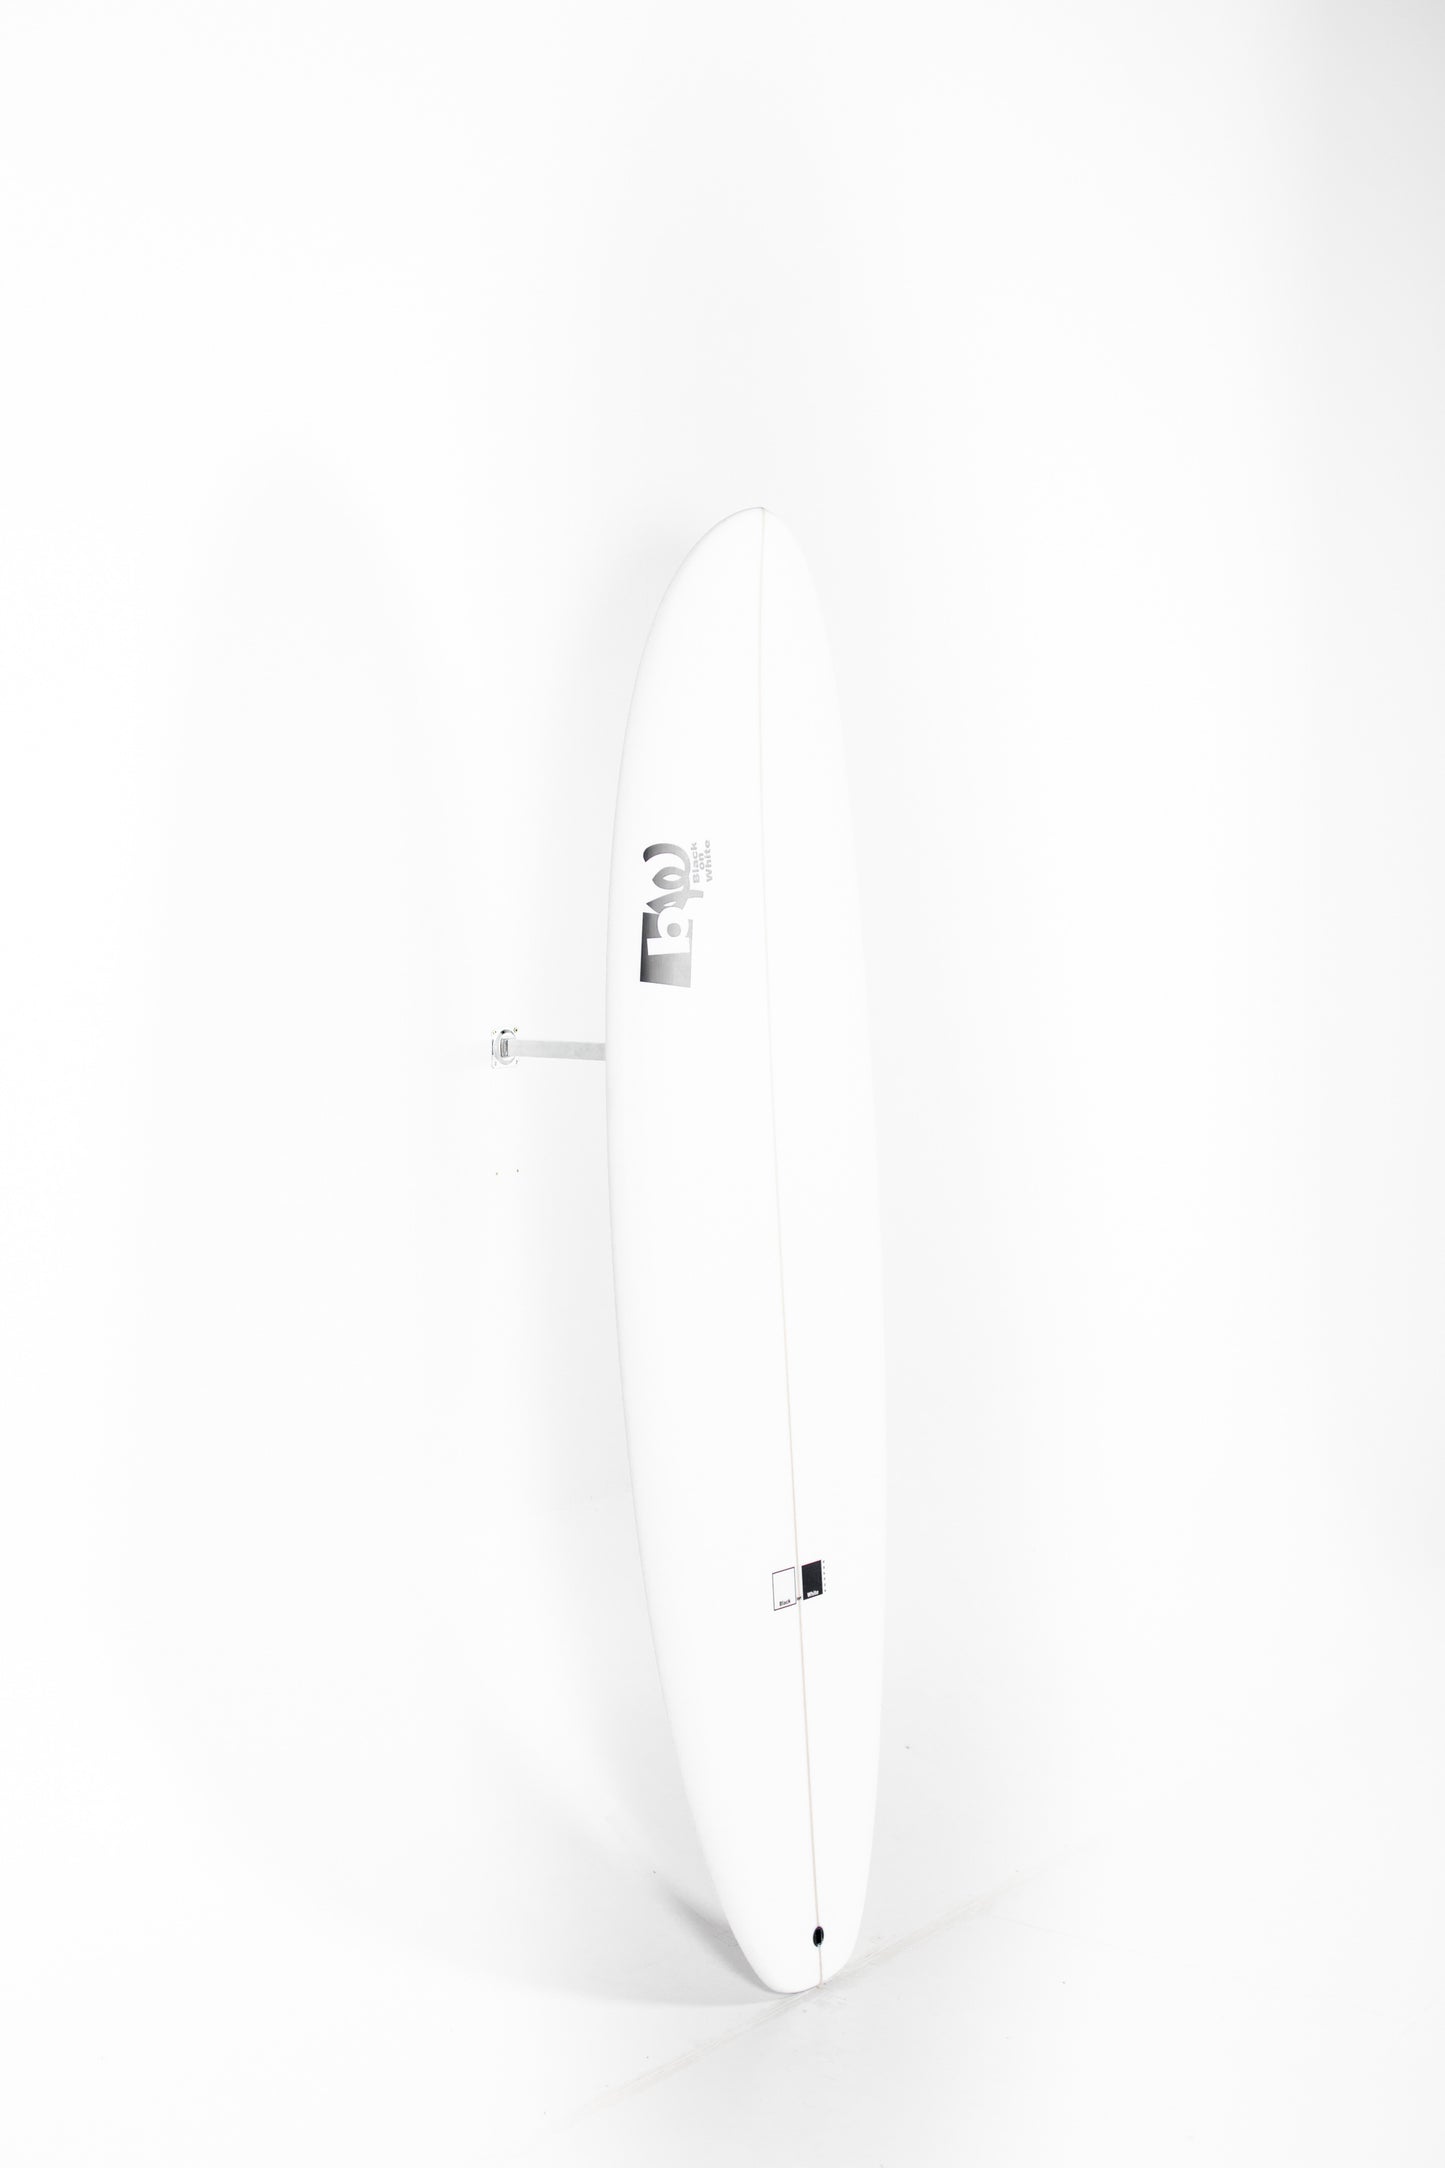 
                  
                    BW SURFBOARDS - BW SURFBOARDS Potato 6'6" x 22 5/8 x 2 3/4 x 49.6L. at PUKAS SURF SHOP
                  
                